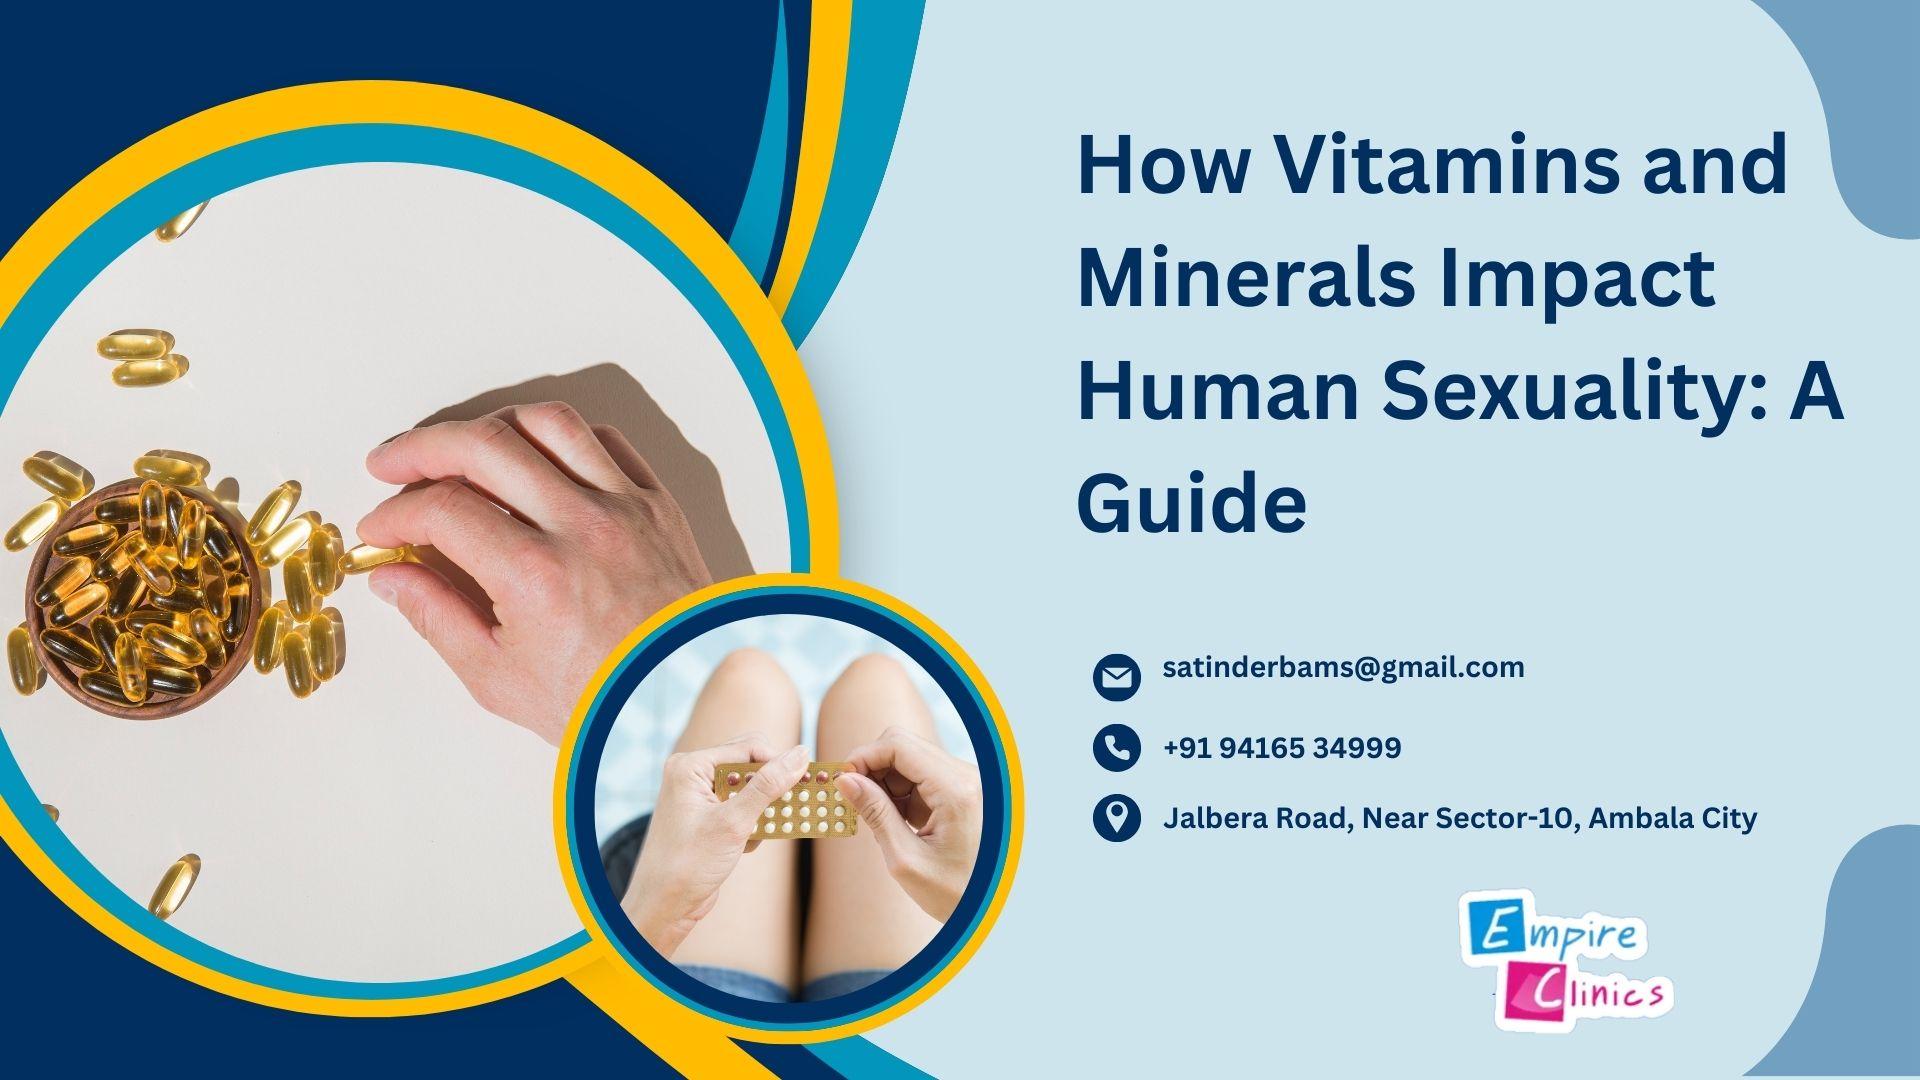 How Vitamins and Minerals Impact Human Sexuality: A Guide